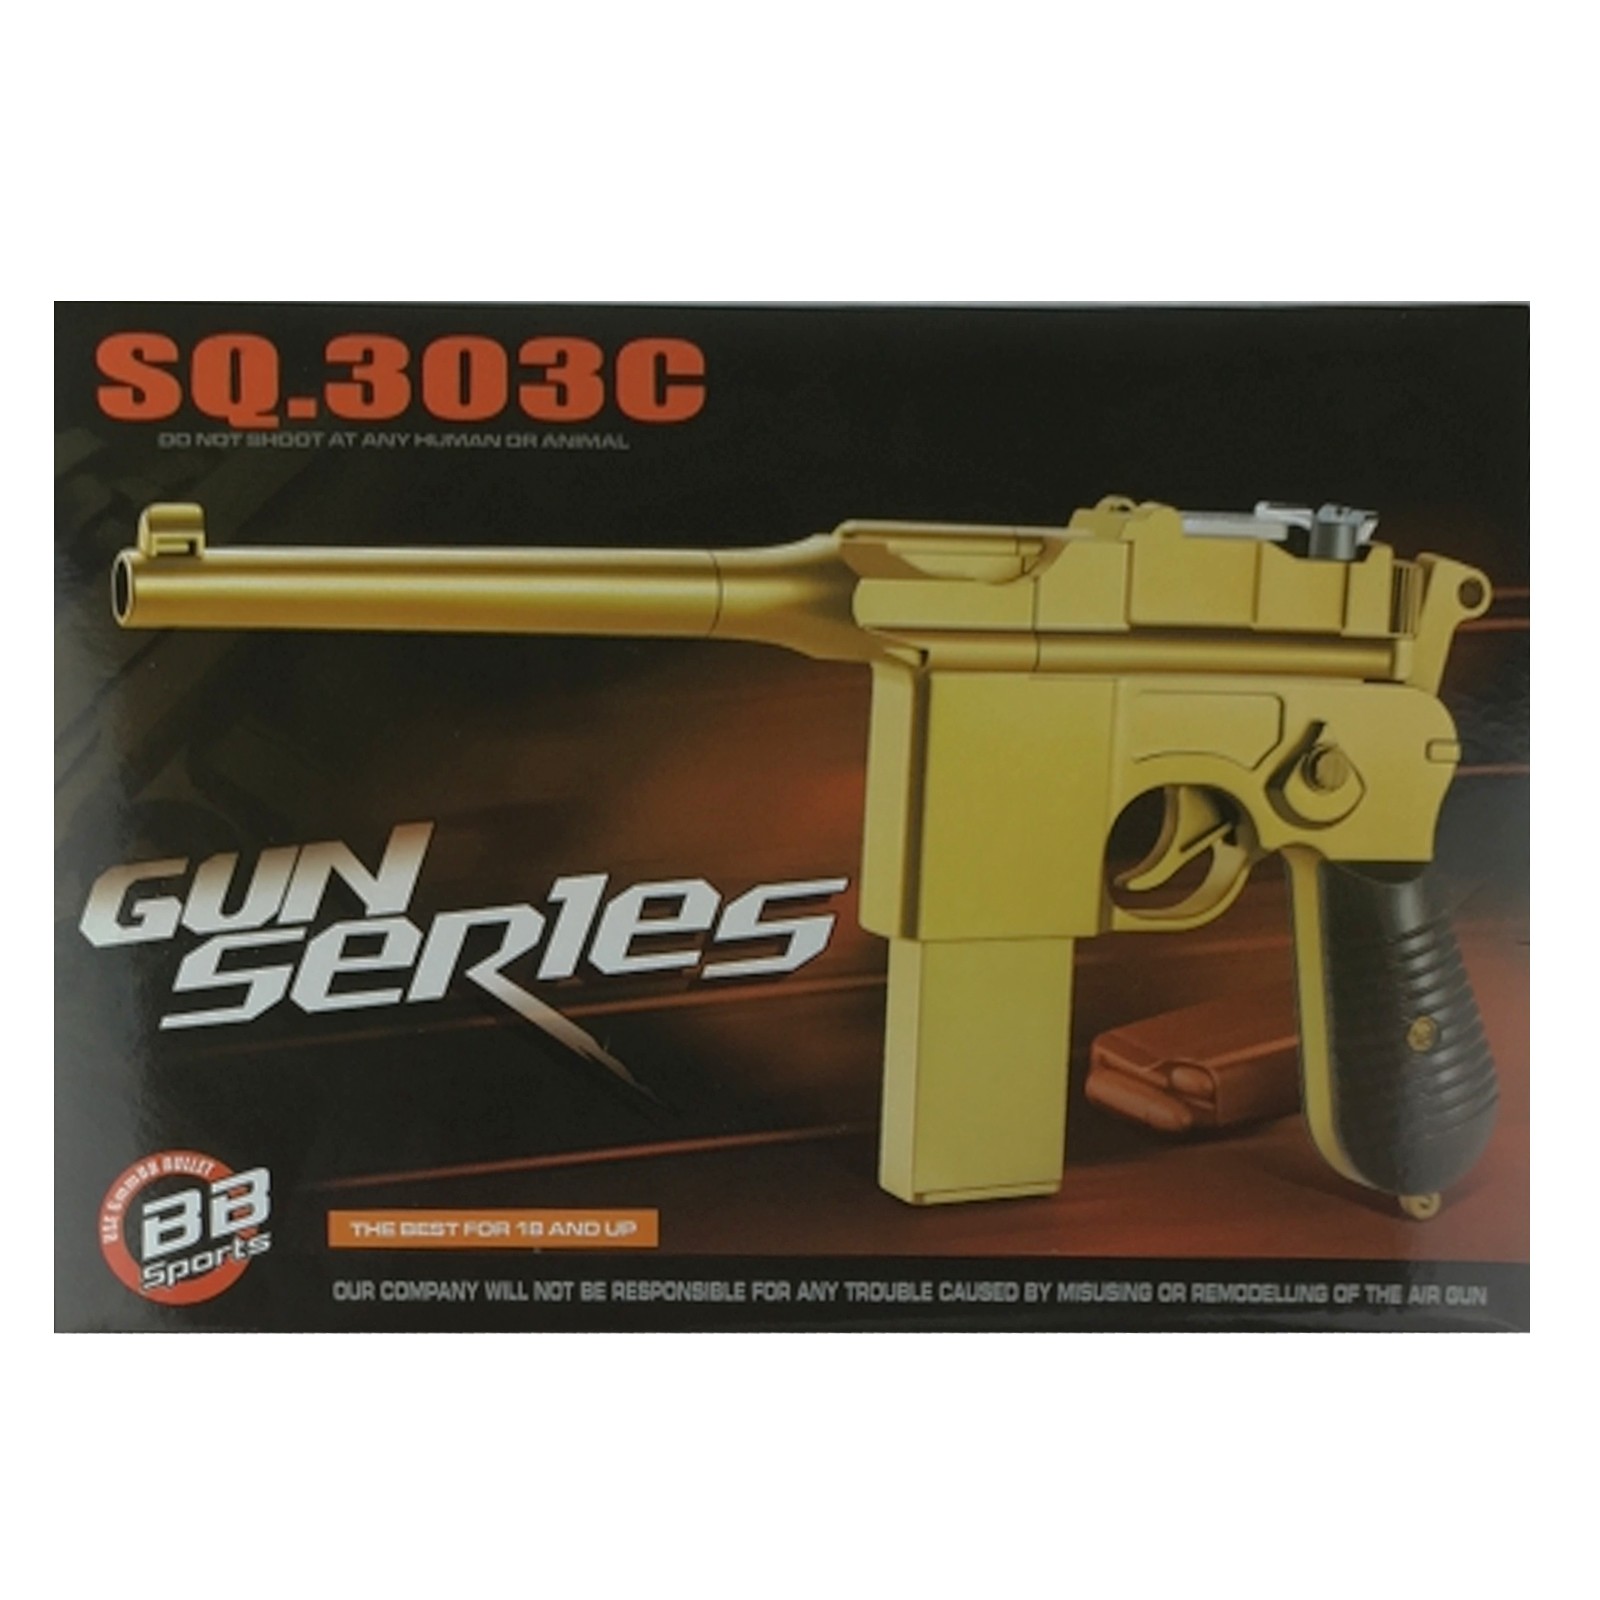 Pistole Airsoft, gold 2 Magazine , ABS Kunststoff inkl. Munition